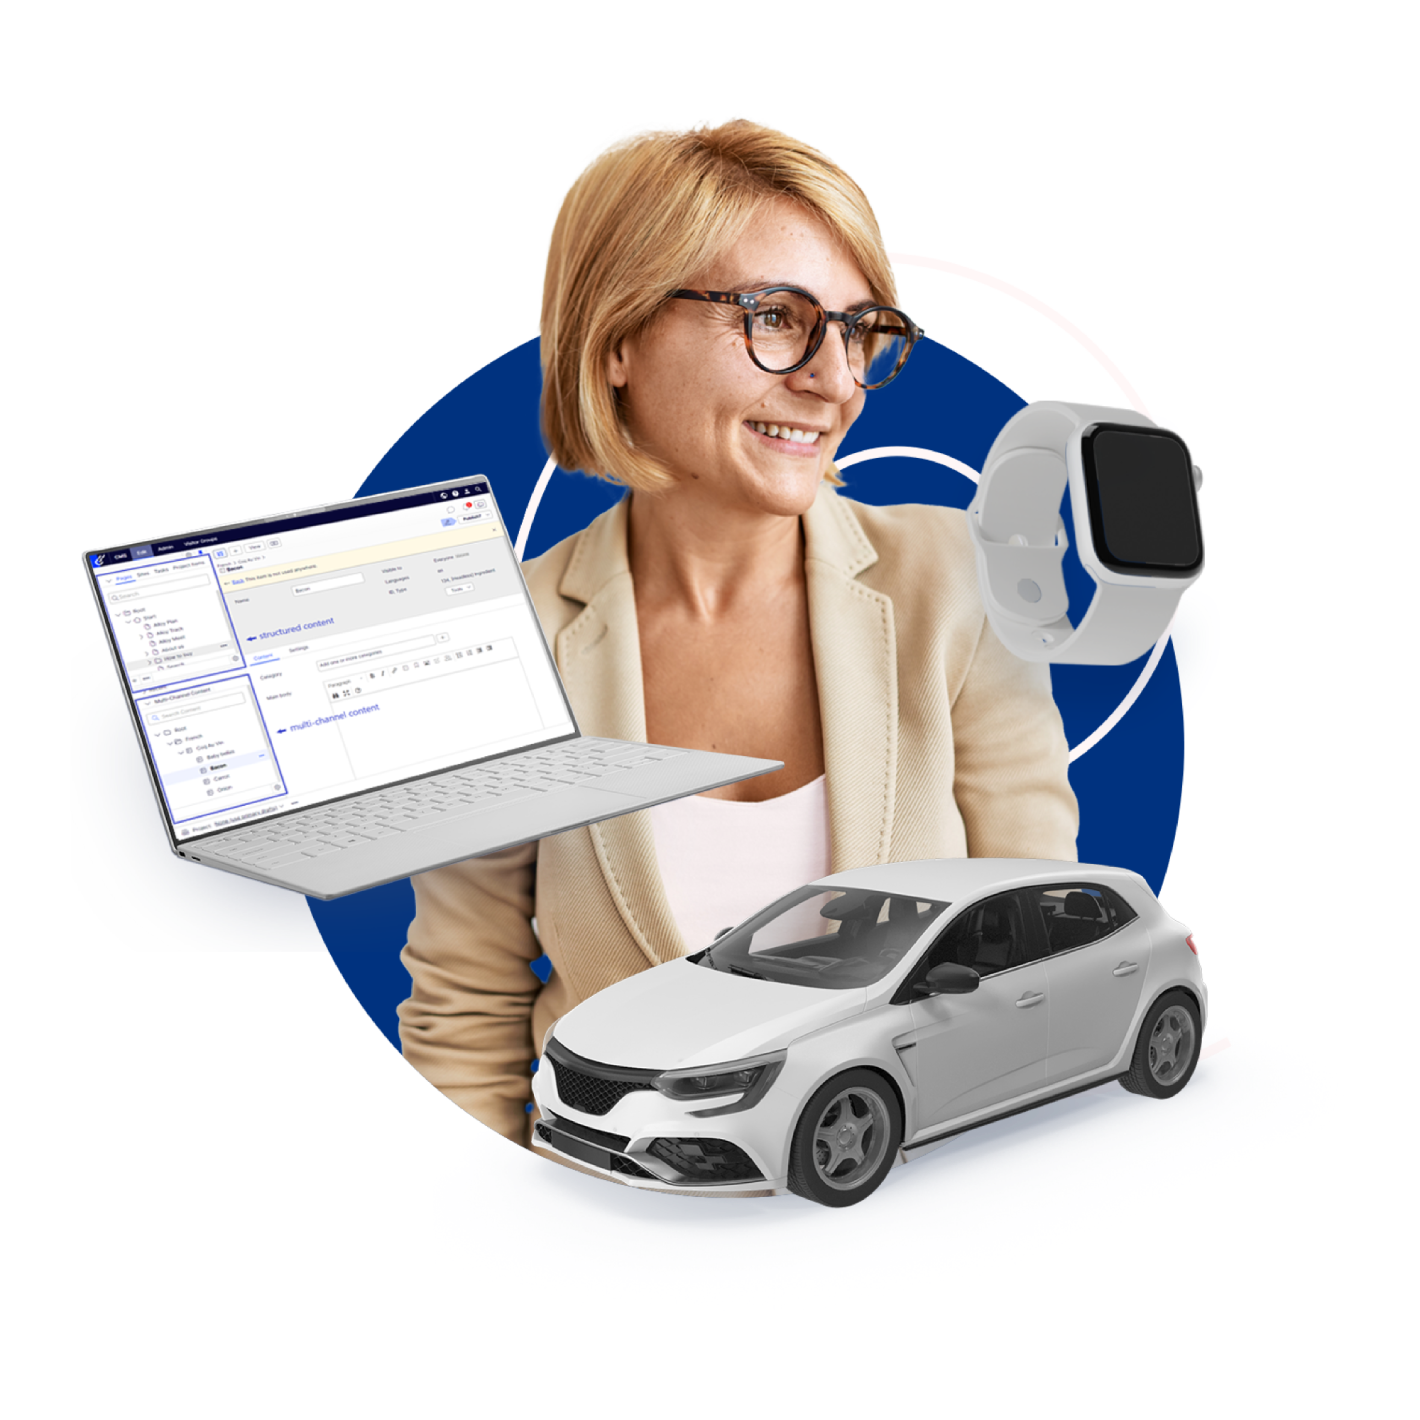 graphic showing woman and laptop, car and smart watch